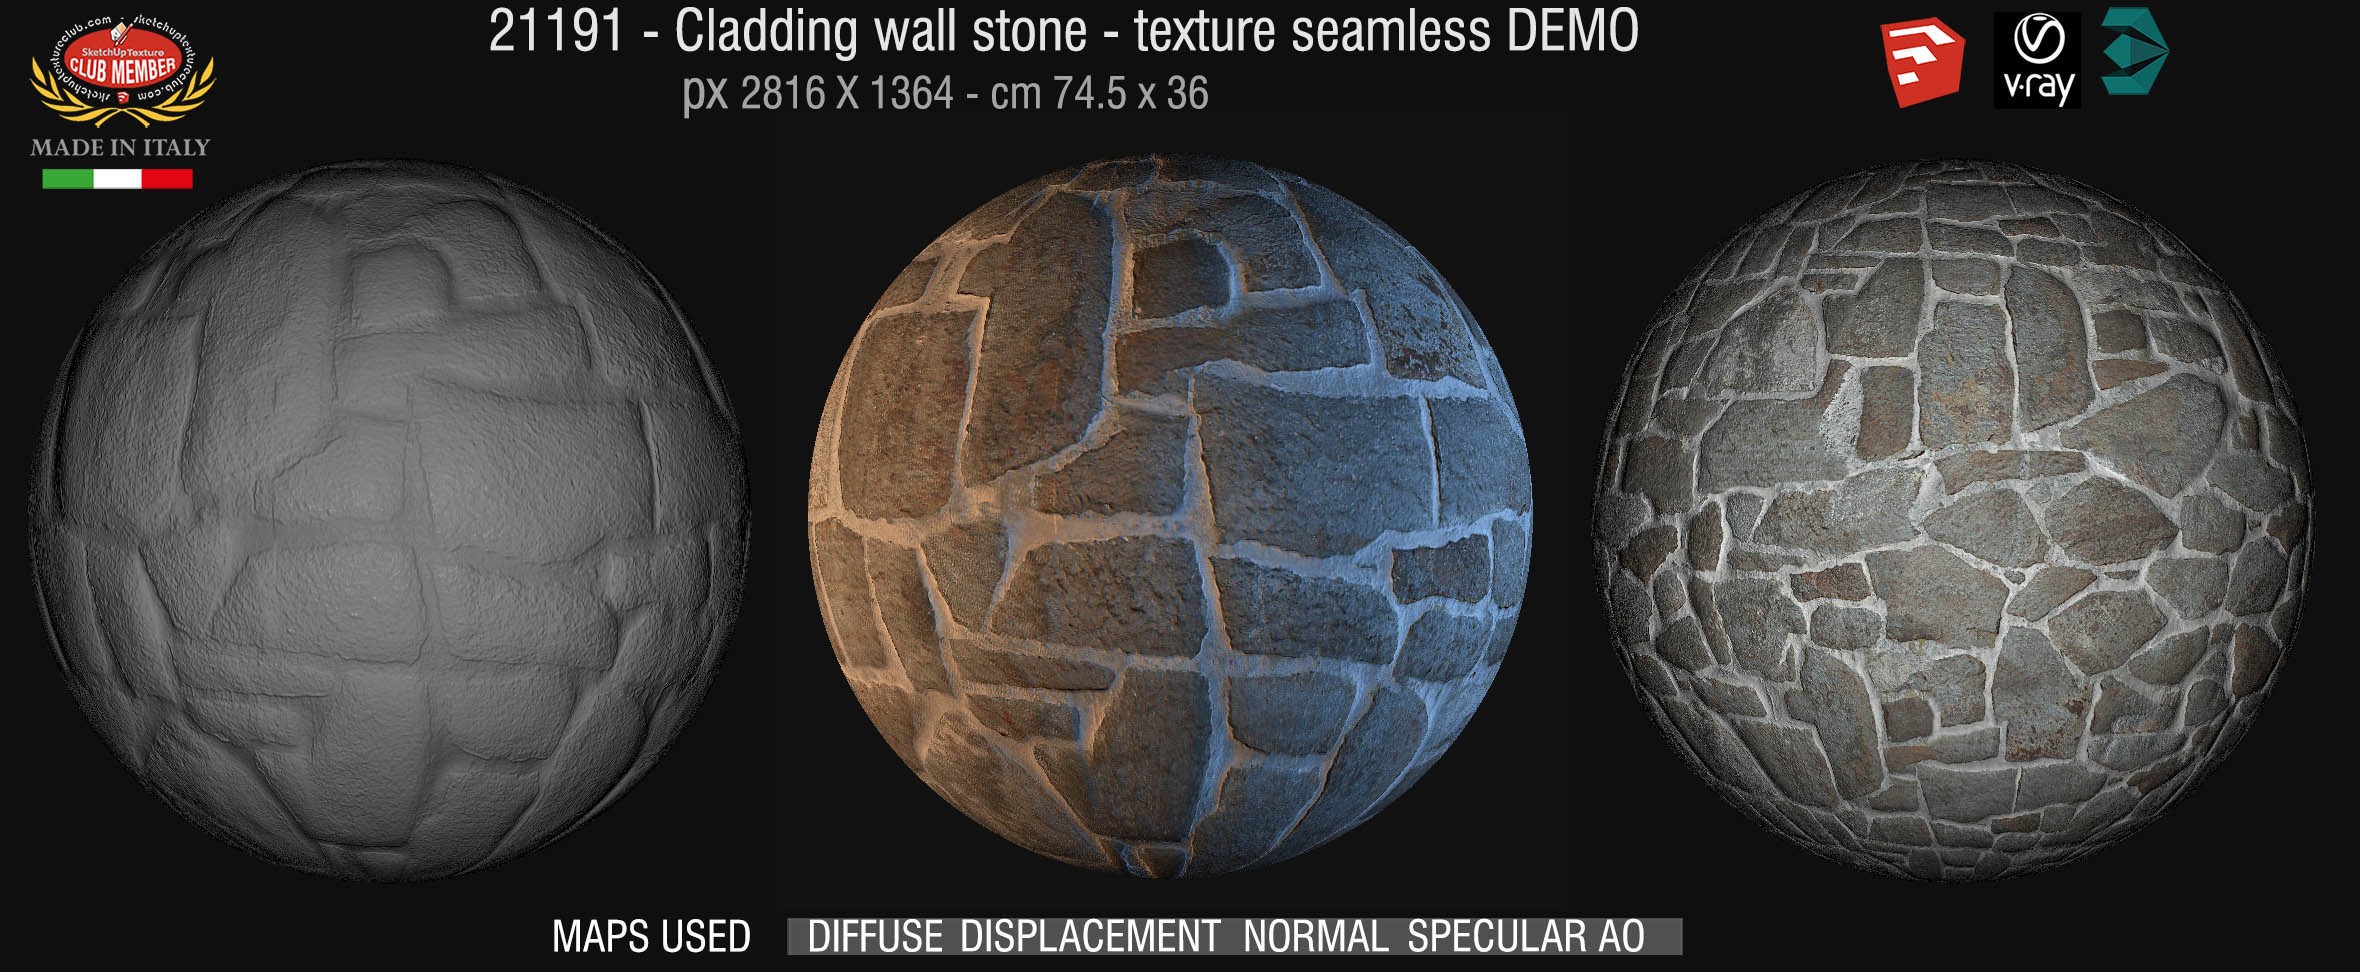 21191 Cladding wall stones texture + maps DEMO